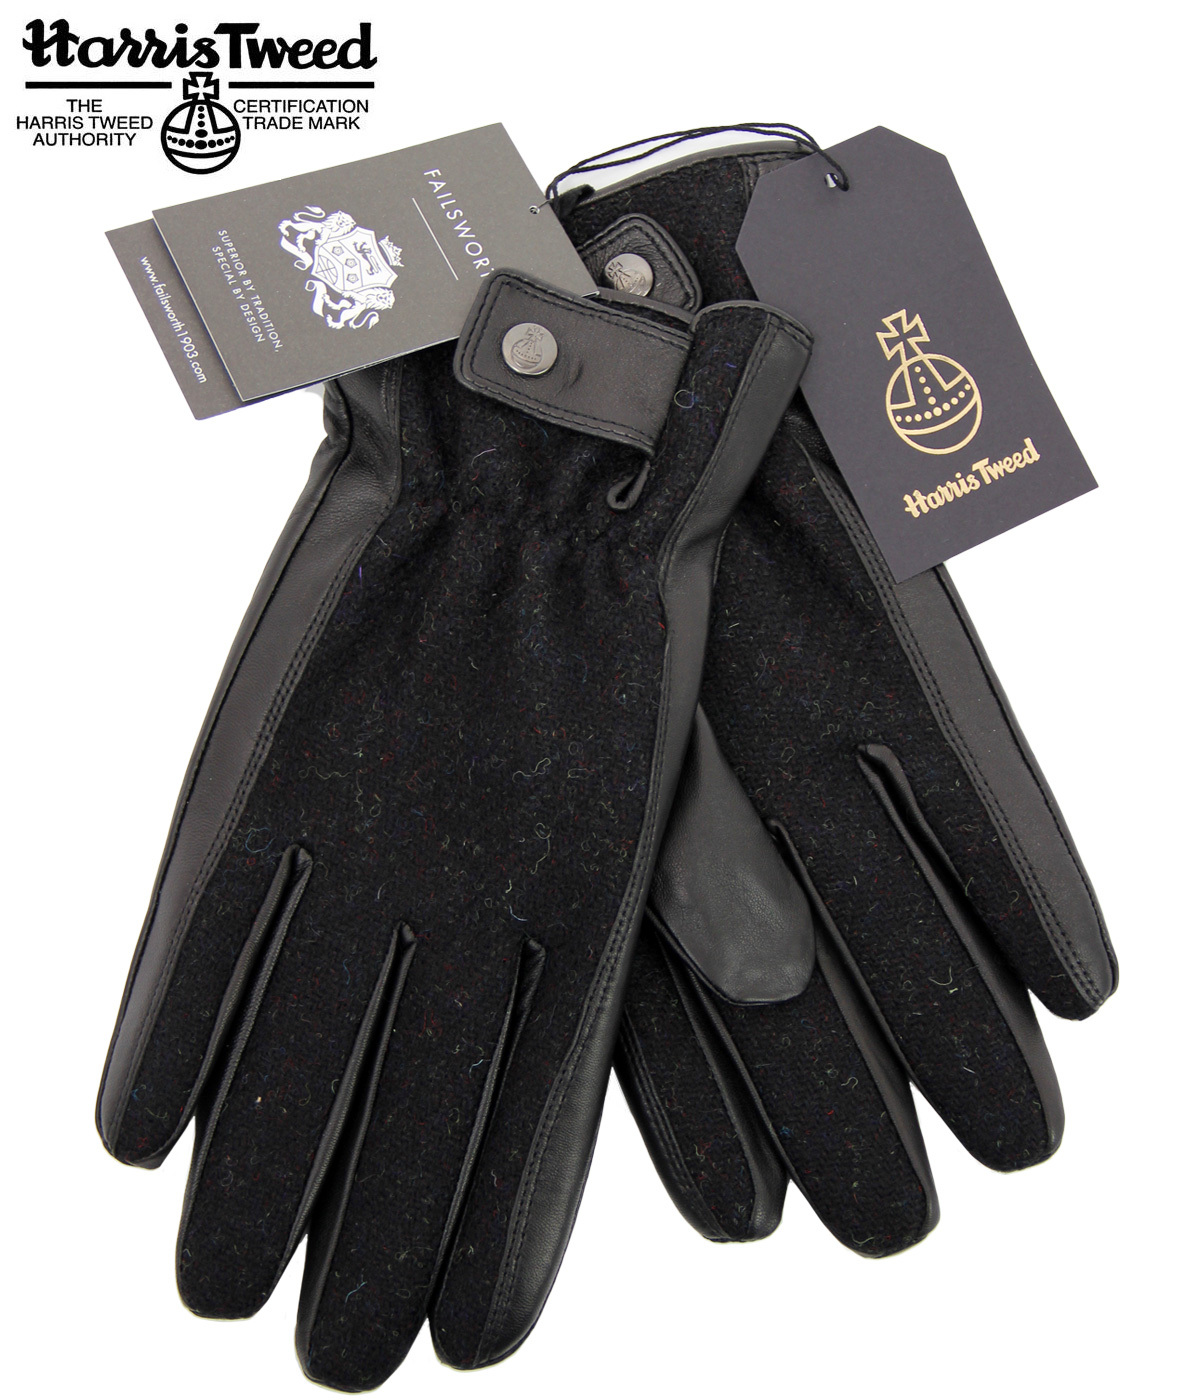 Rodel FAILSWORTH Donegal Tweed & Leather Gloves